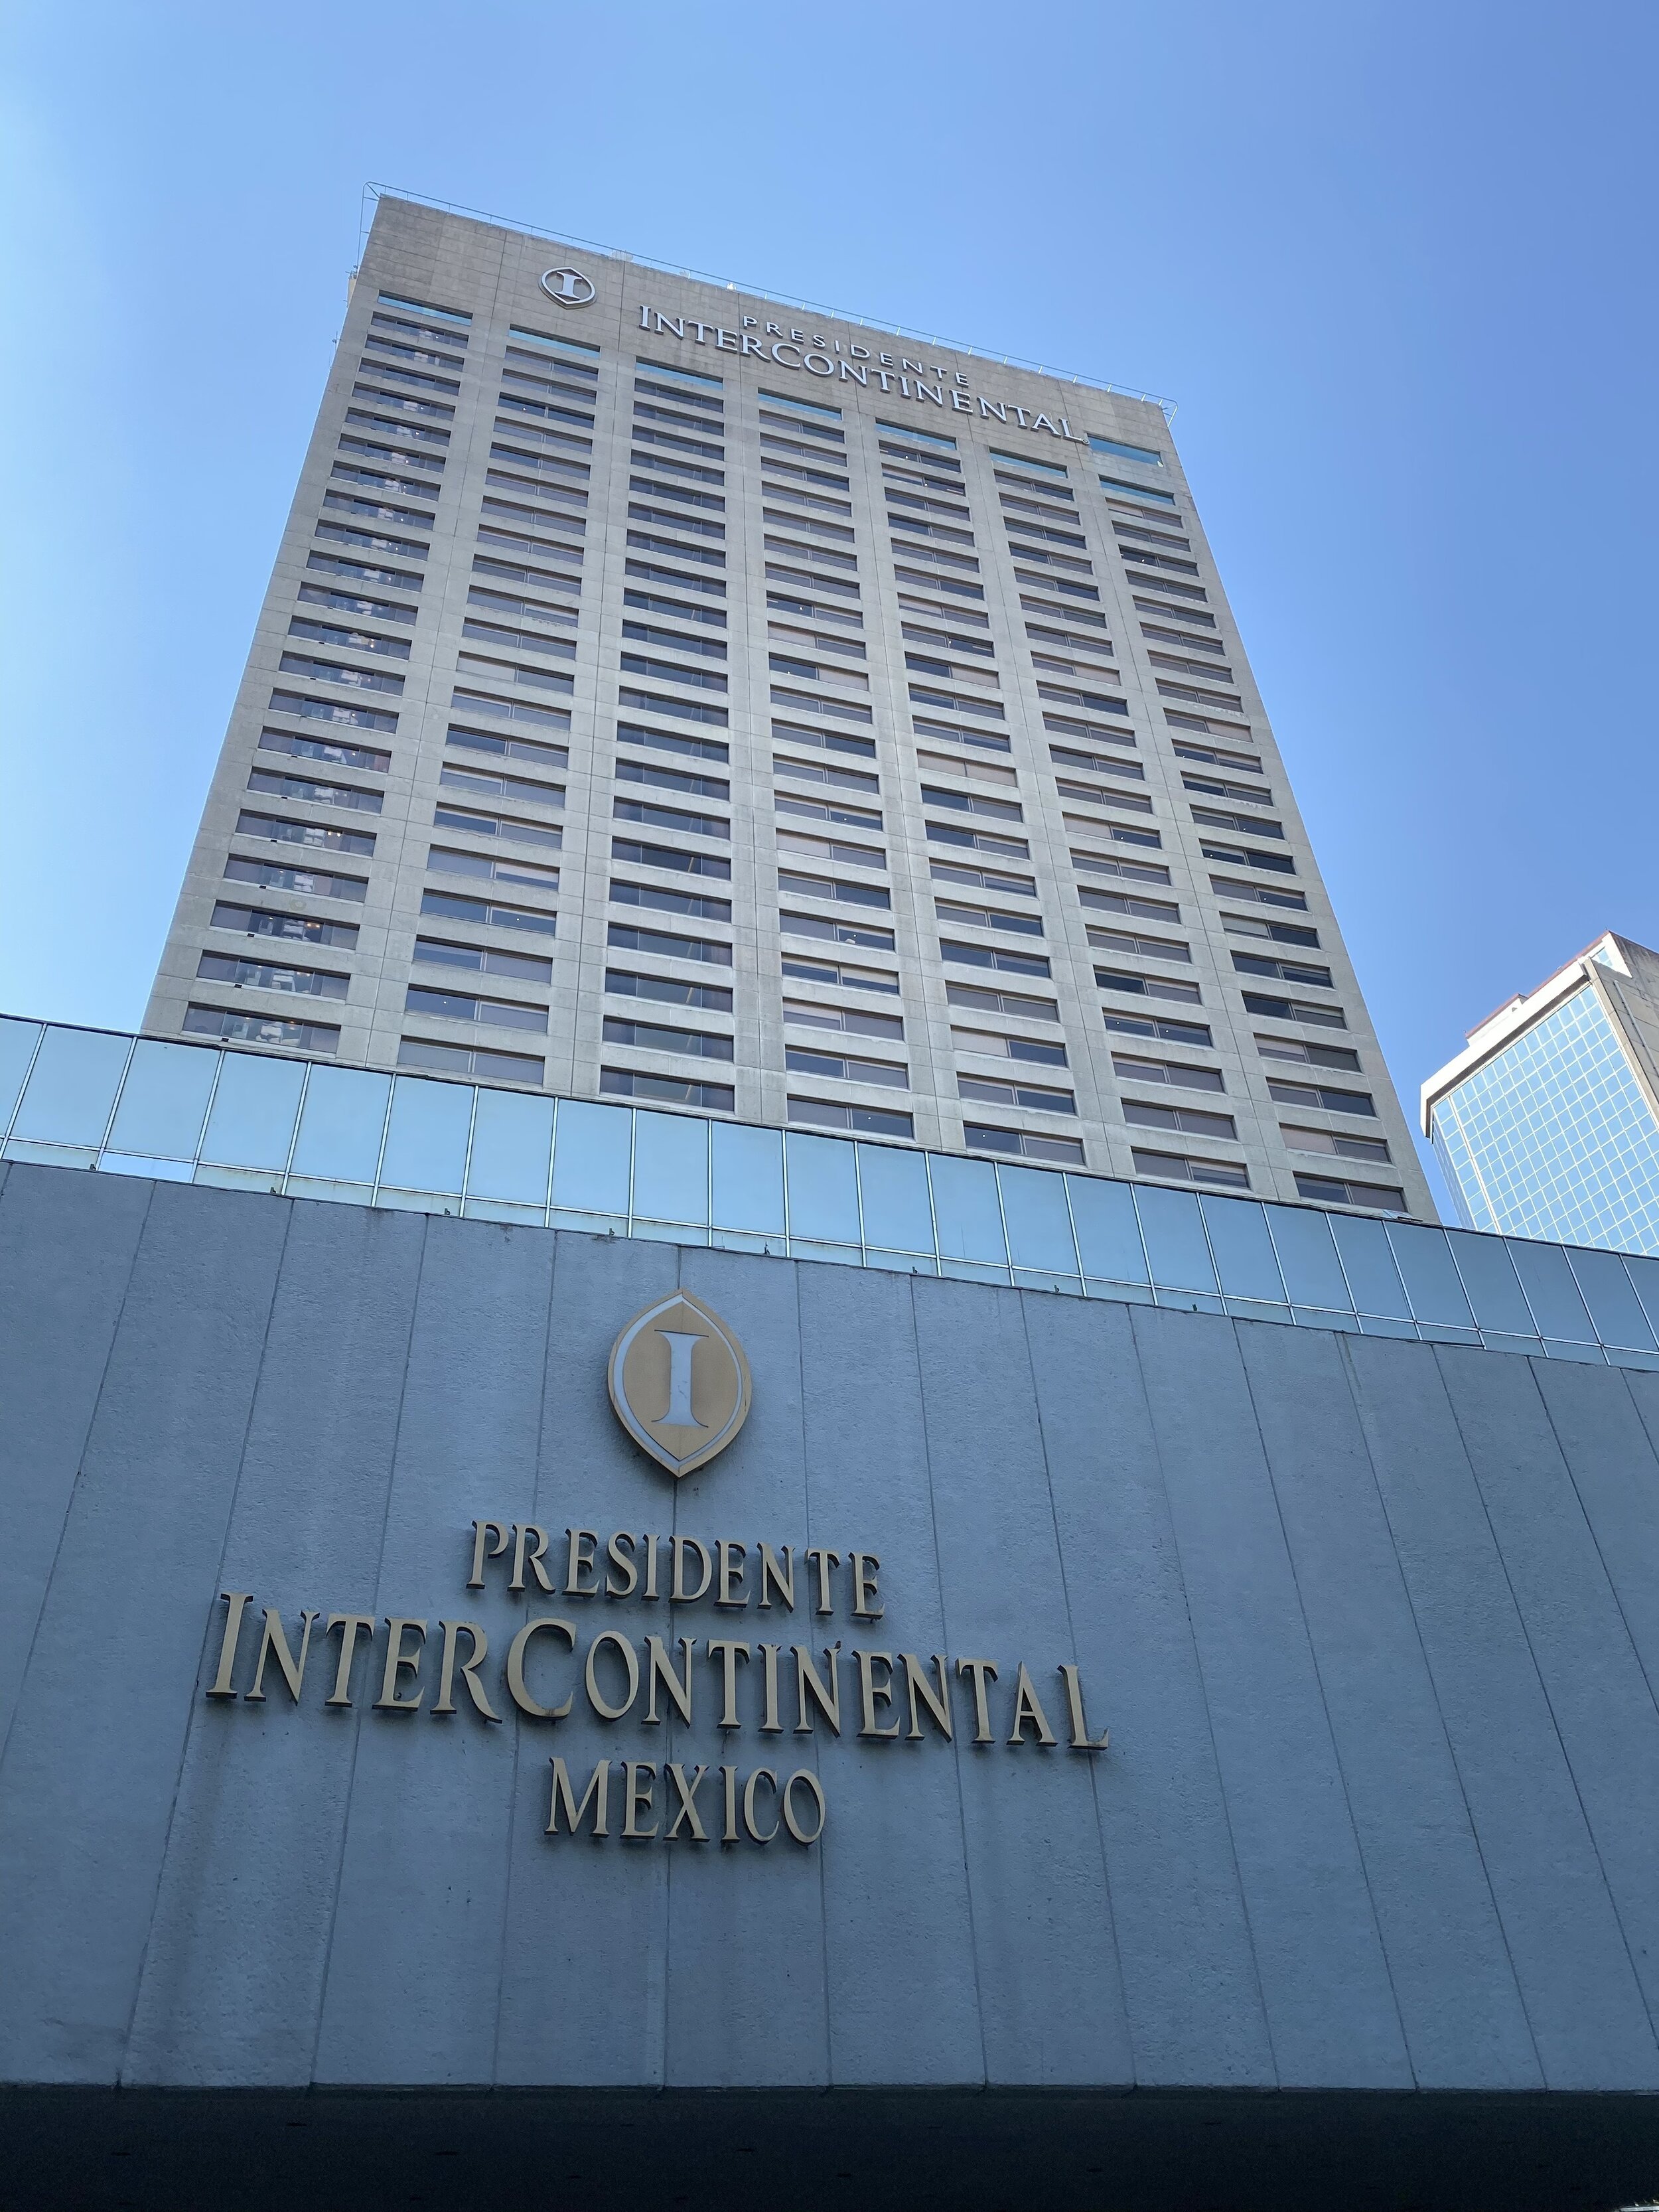 The Best Place to Stay in Mexico City: The InterContinental